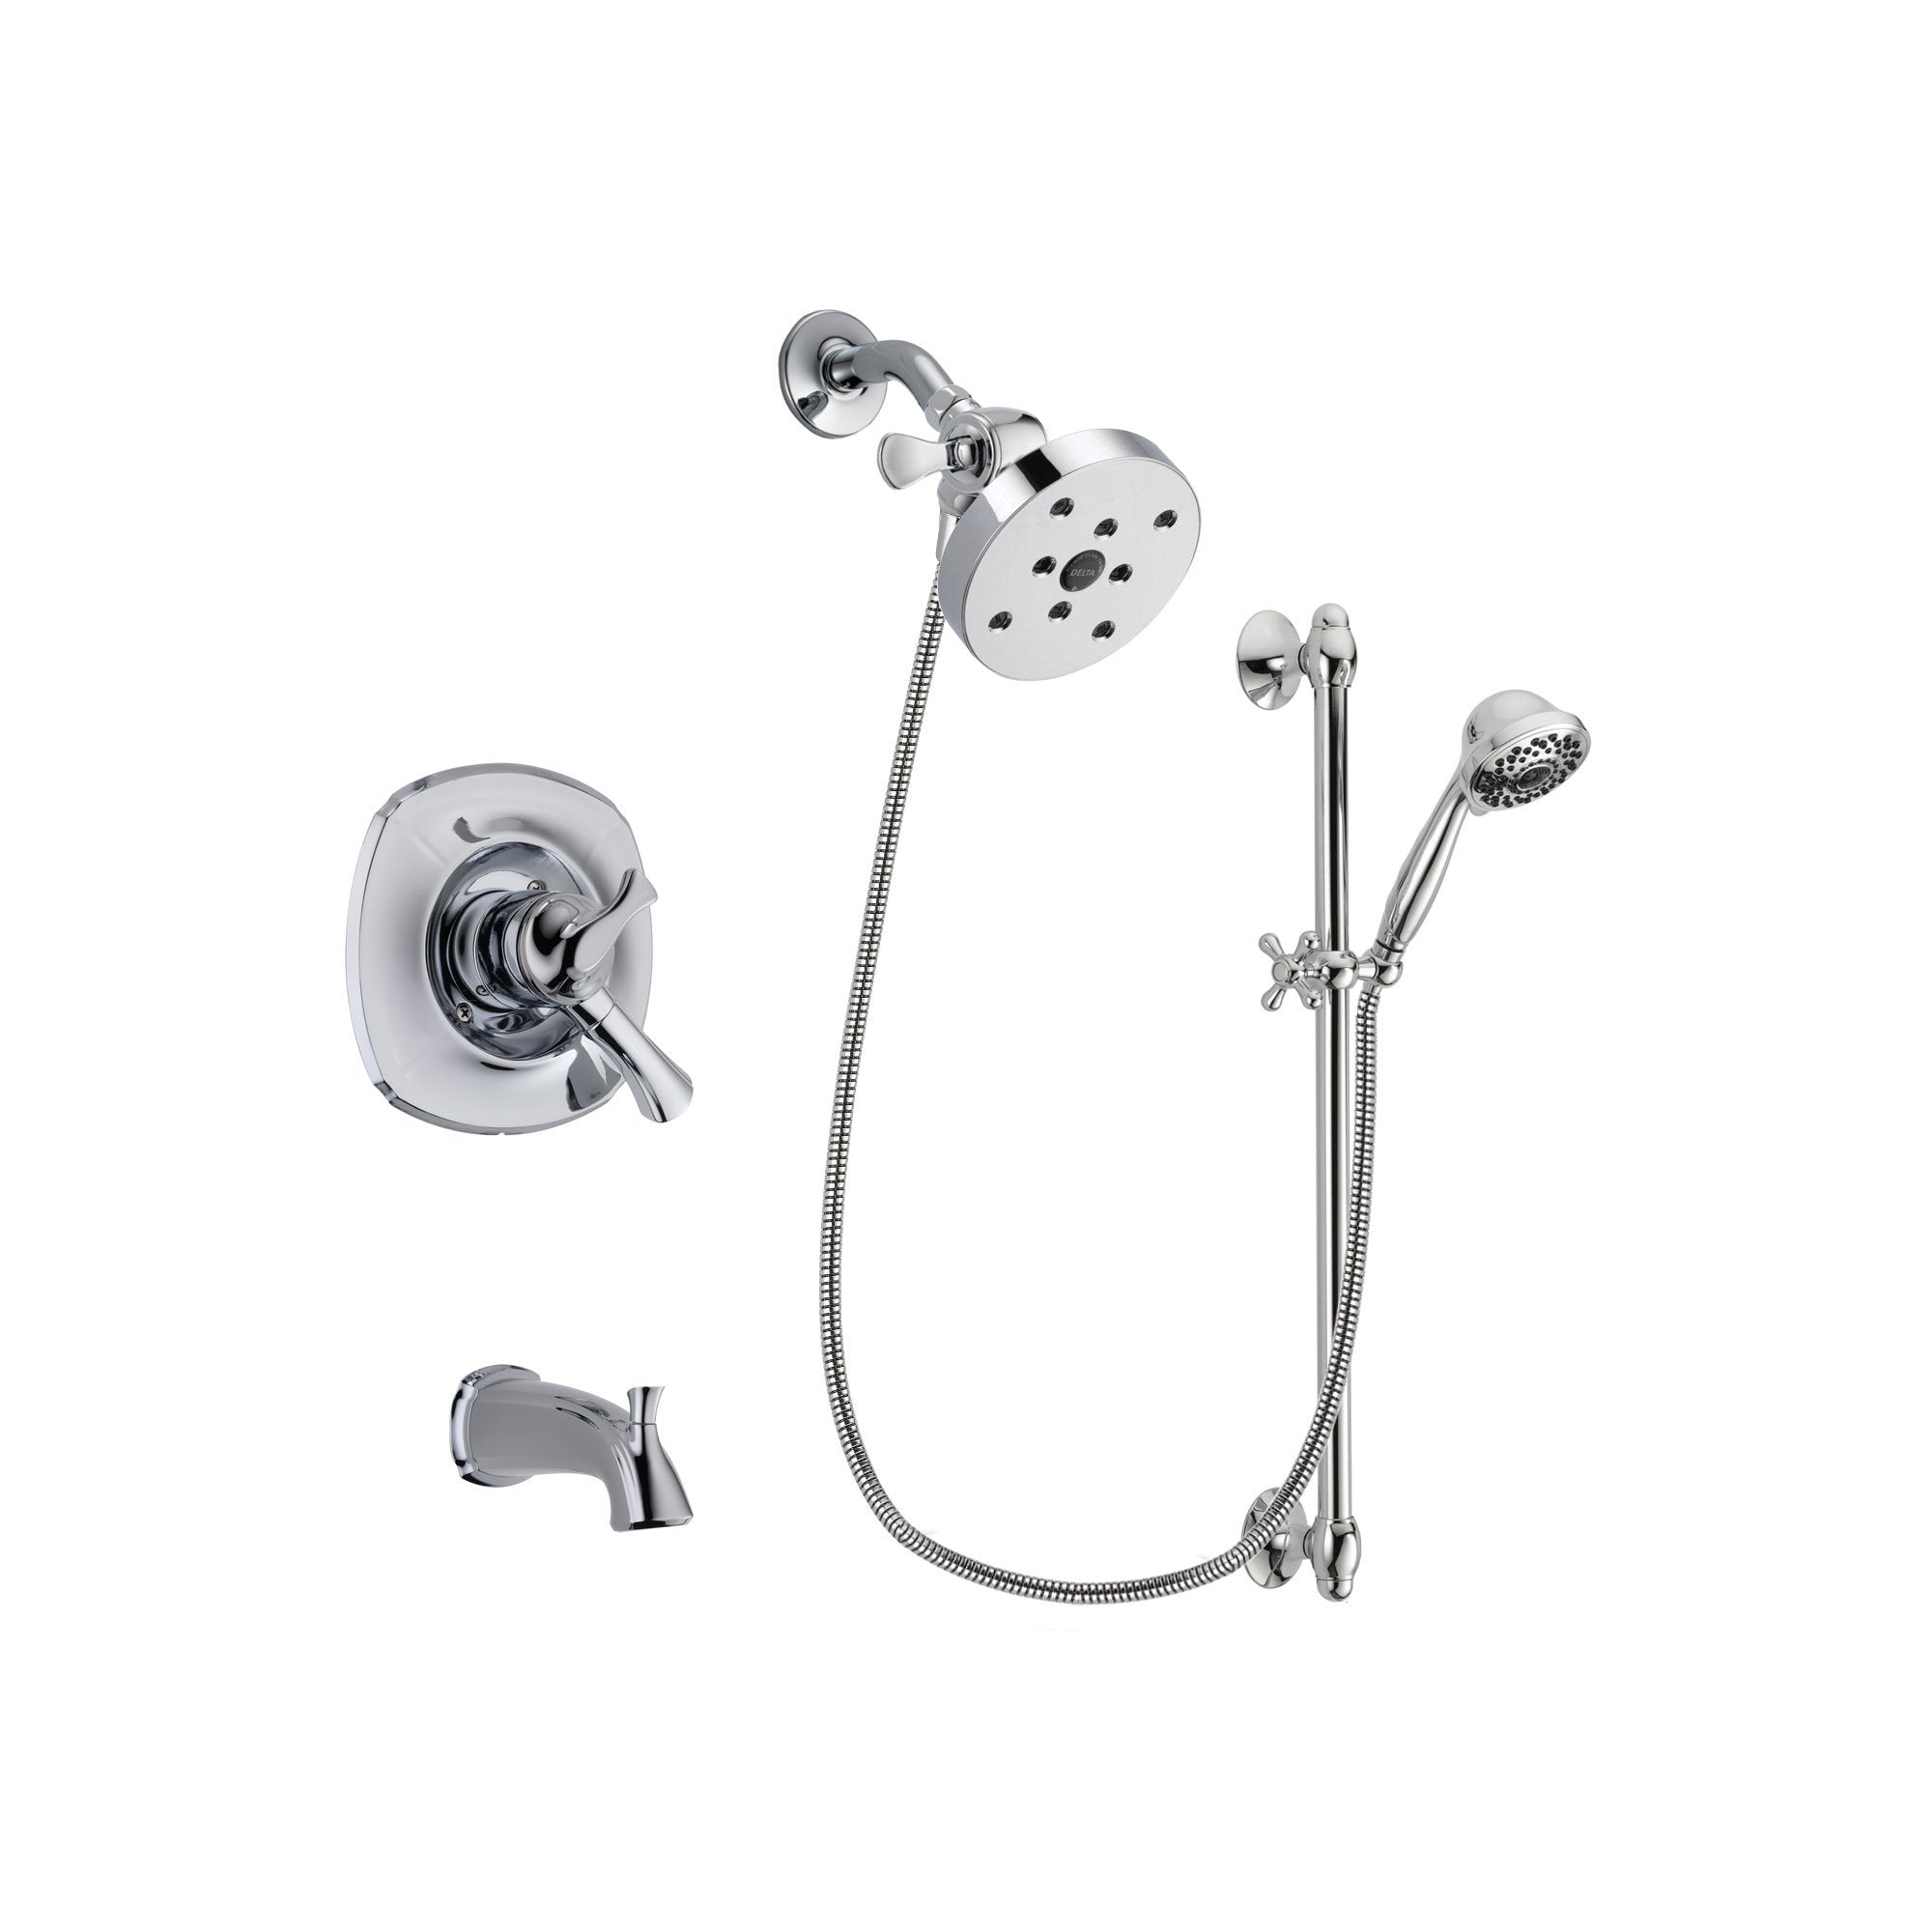 Delta Addison Chrome Tub and Shower Faucet System with Hand Shower DSP0691V